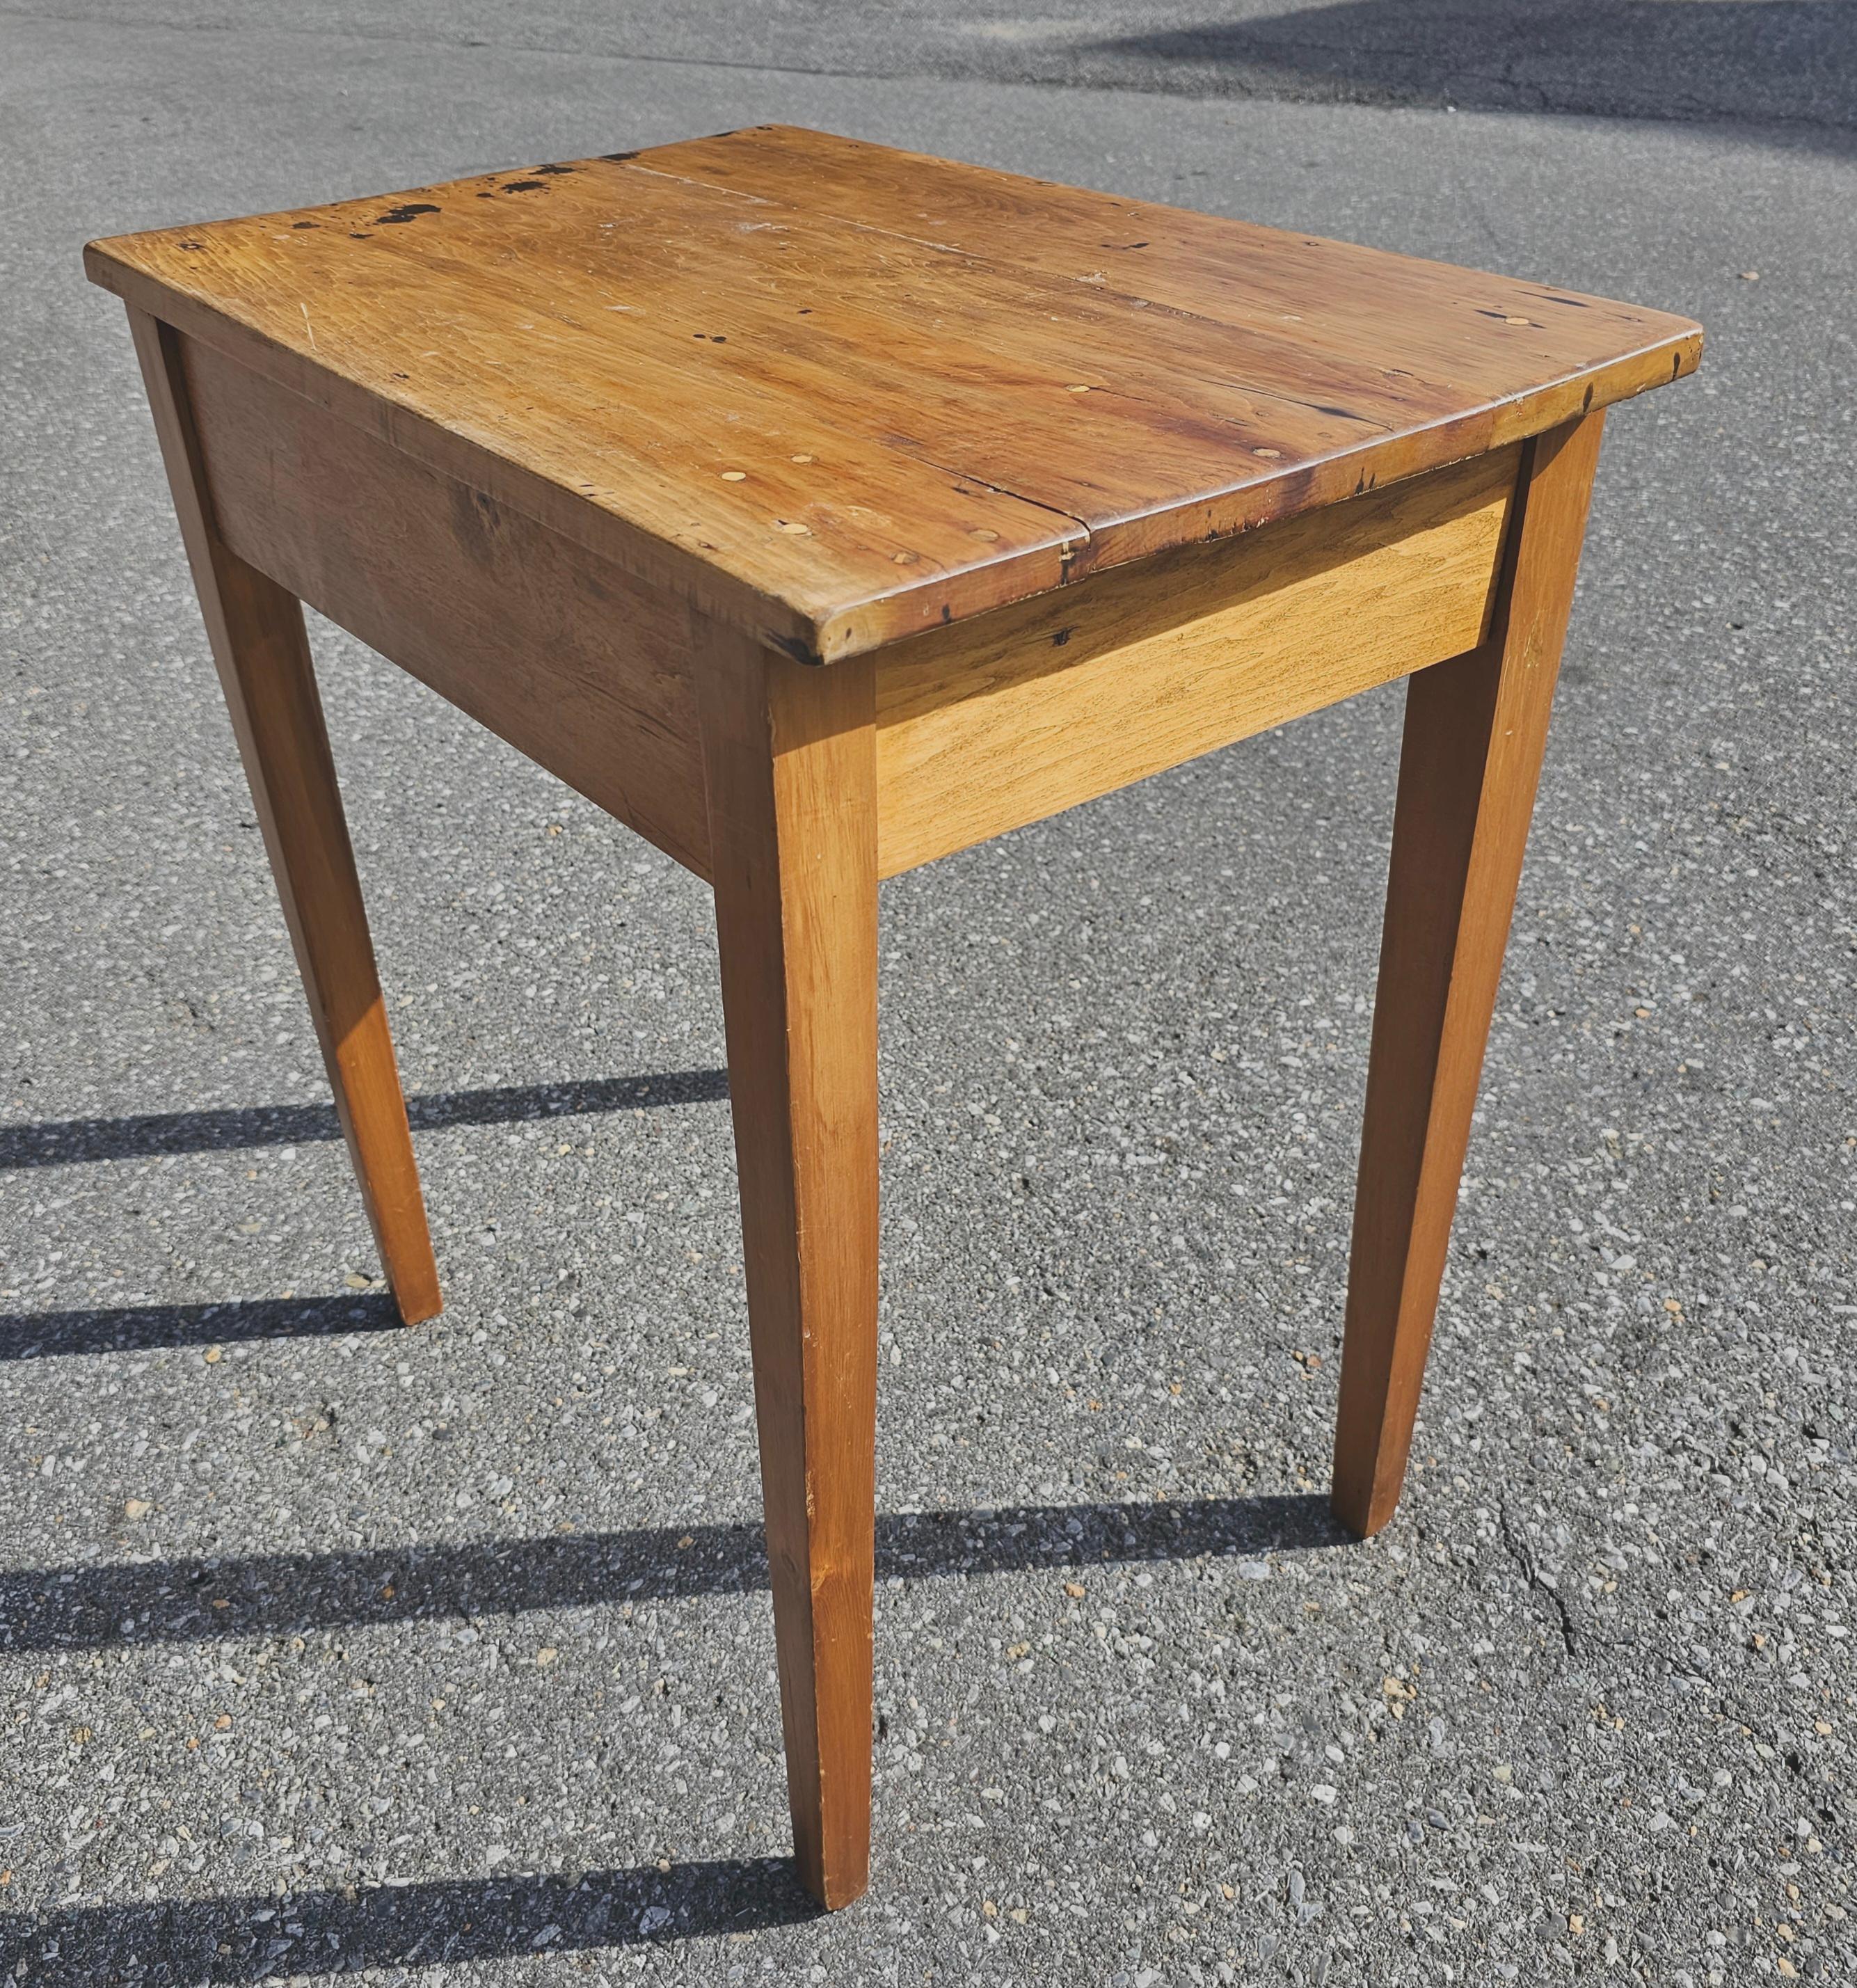 Early American Maple Utility Table, Circa 19th Century. Measures 18..5